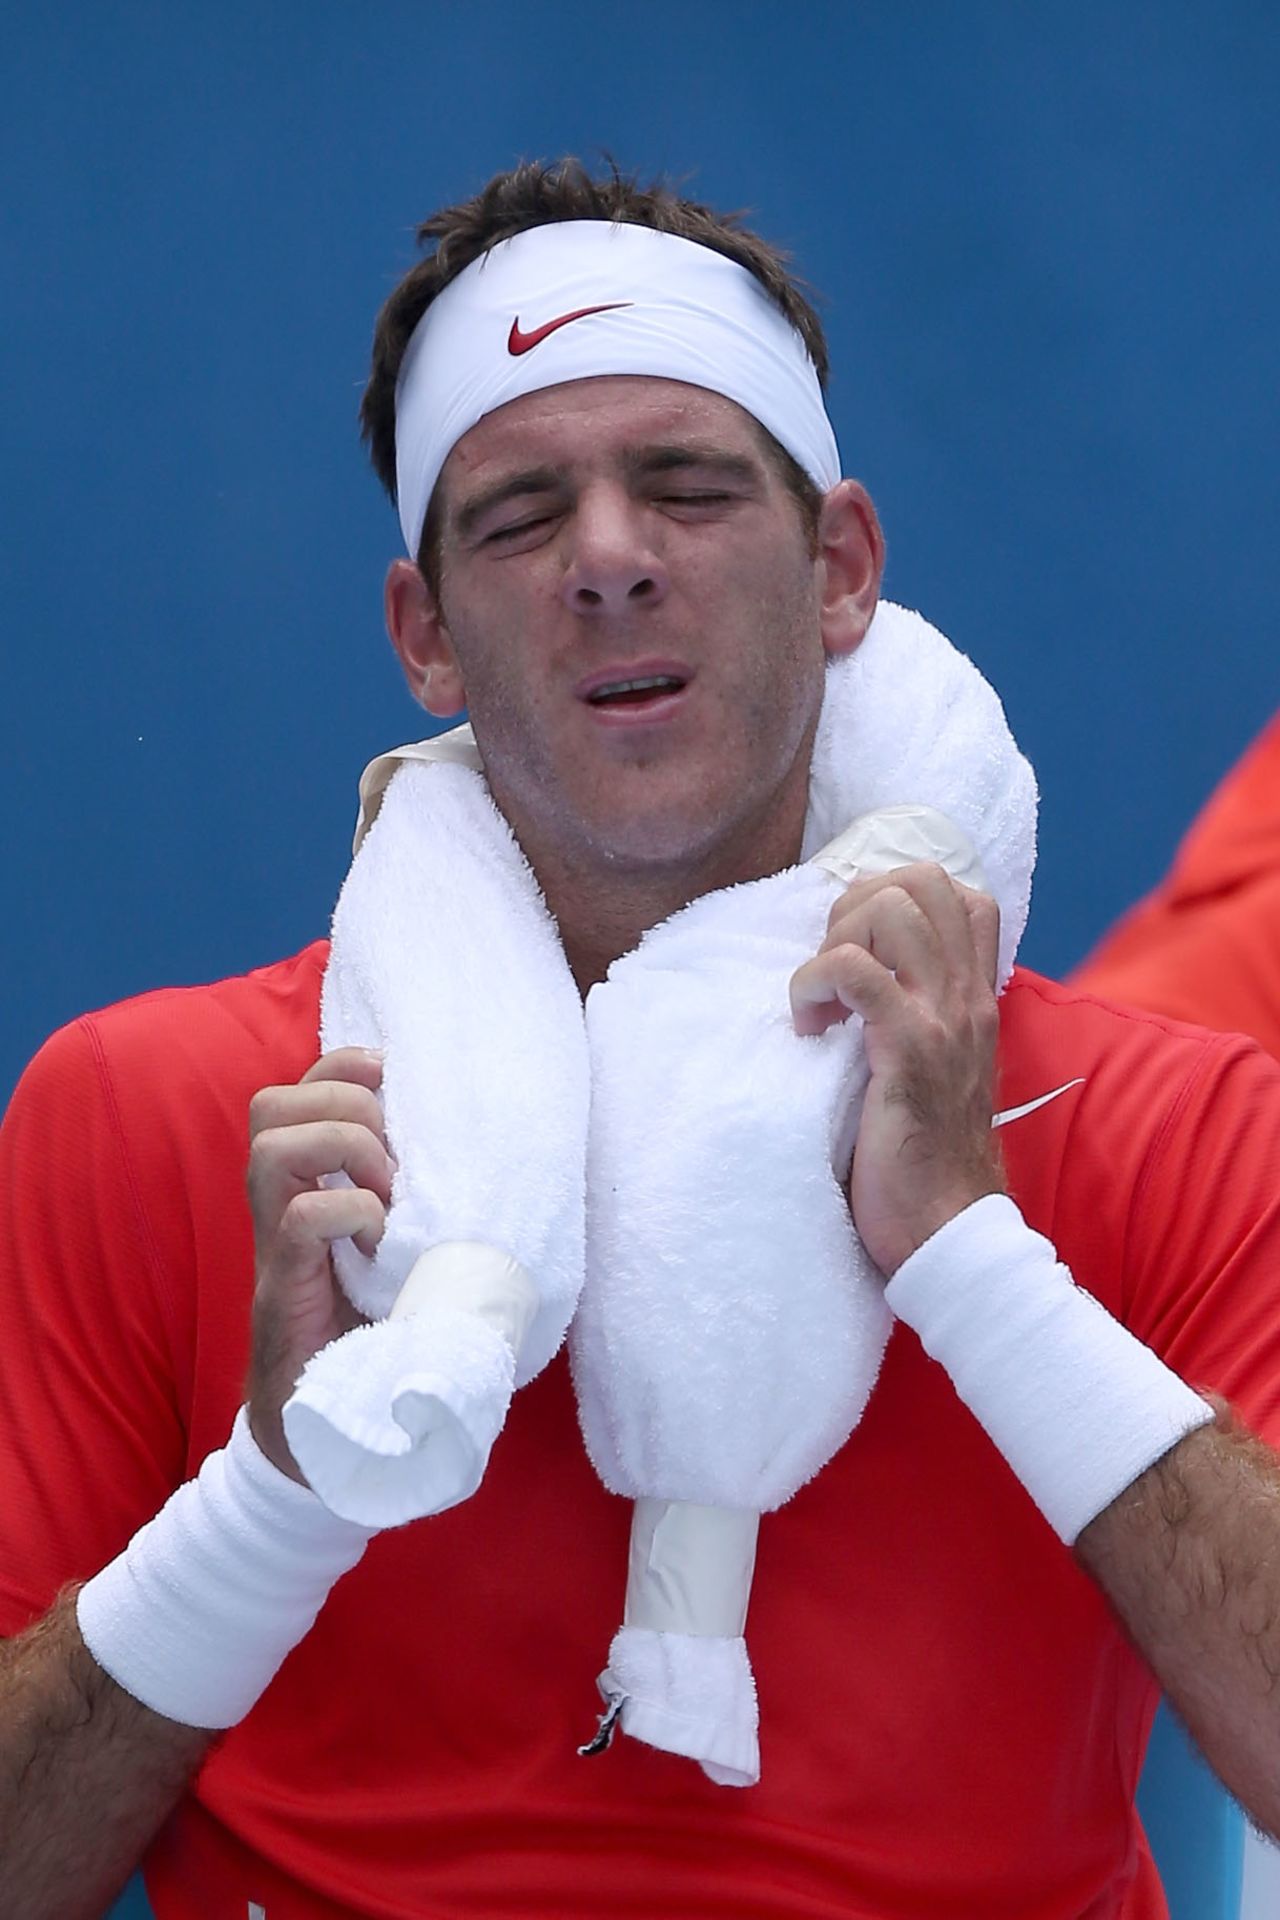 Playing early in the day on Tuesday, Argentina's Juan Martin del Potro felt the heat during his win over American Rhyne Williams.